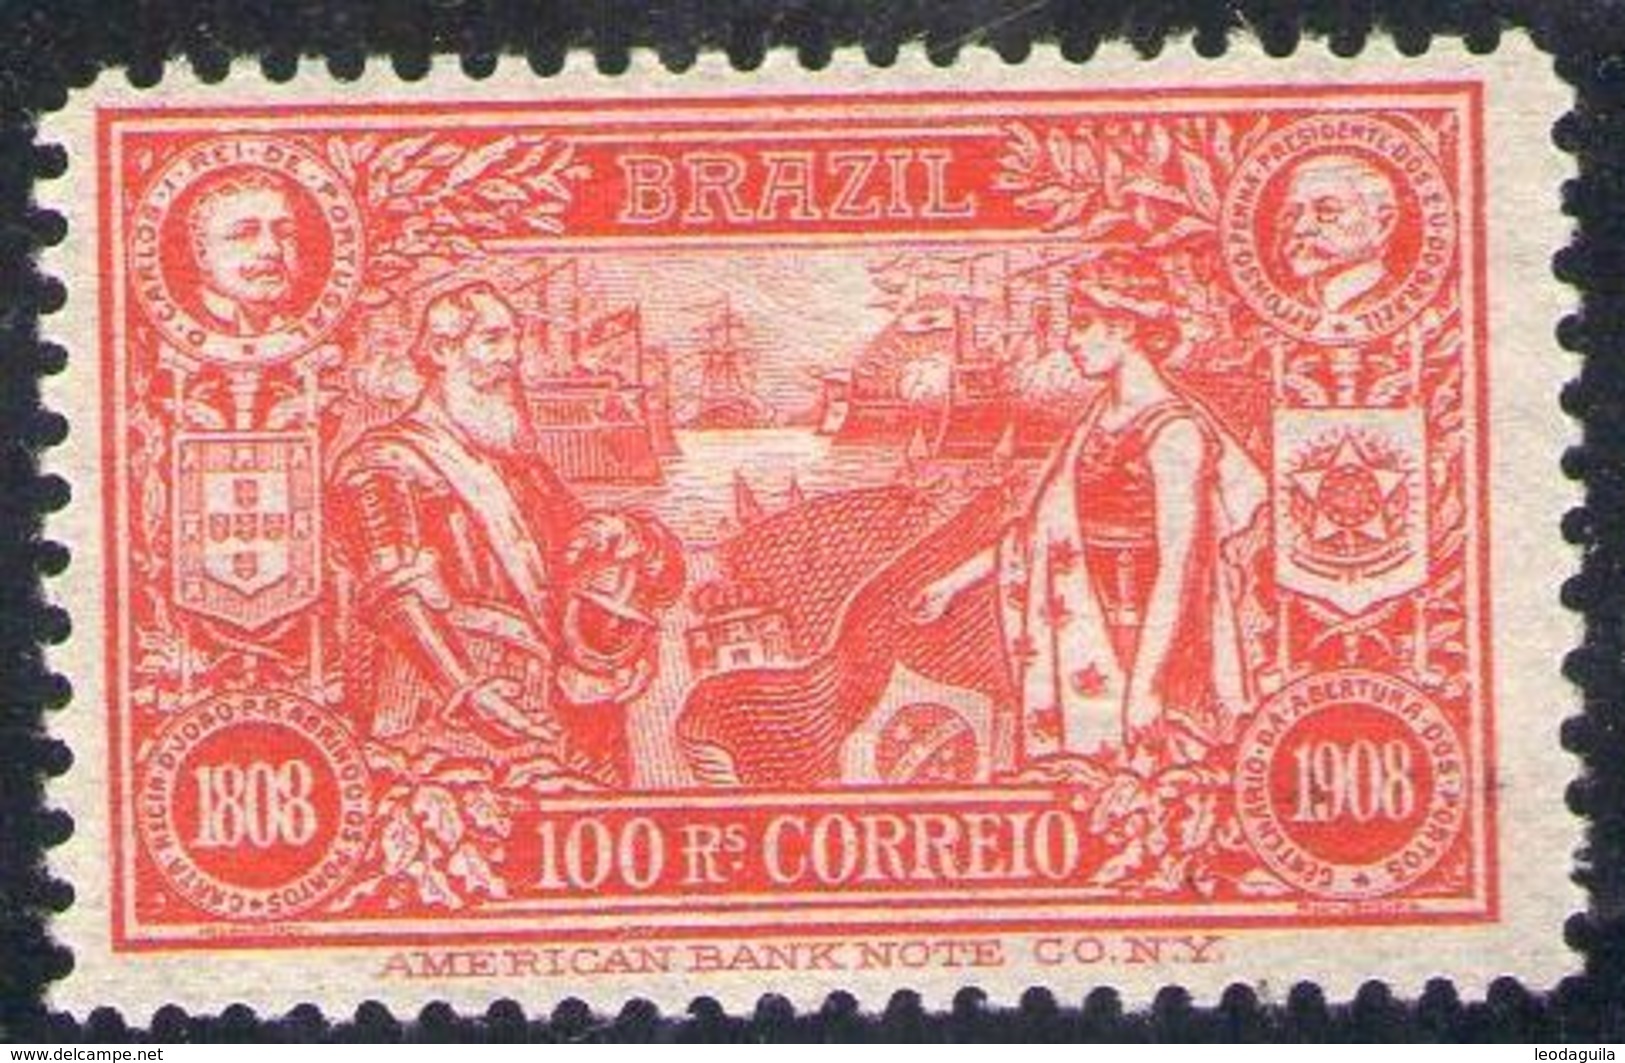 BRAZIL # 190  -  CENTENARY  OF THE OPENING OF PORTS   -  MH  - 1908 - Unused Stamps